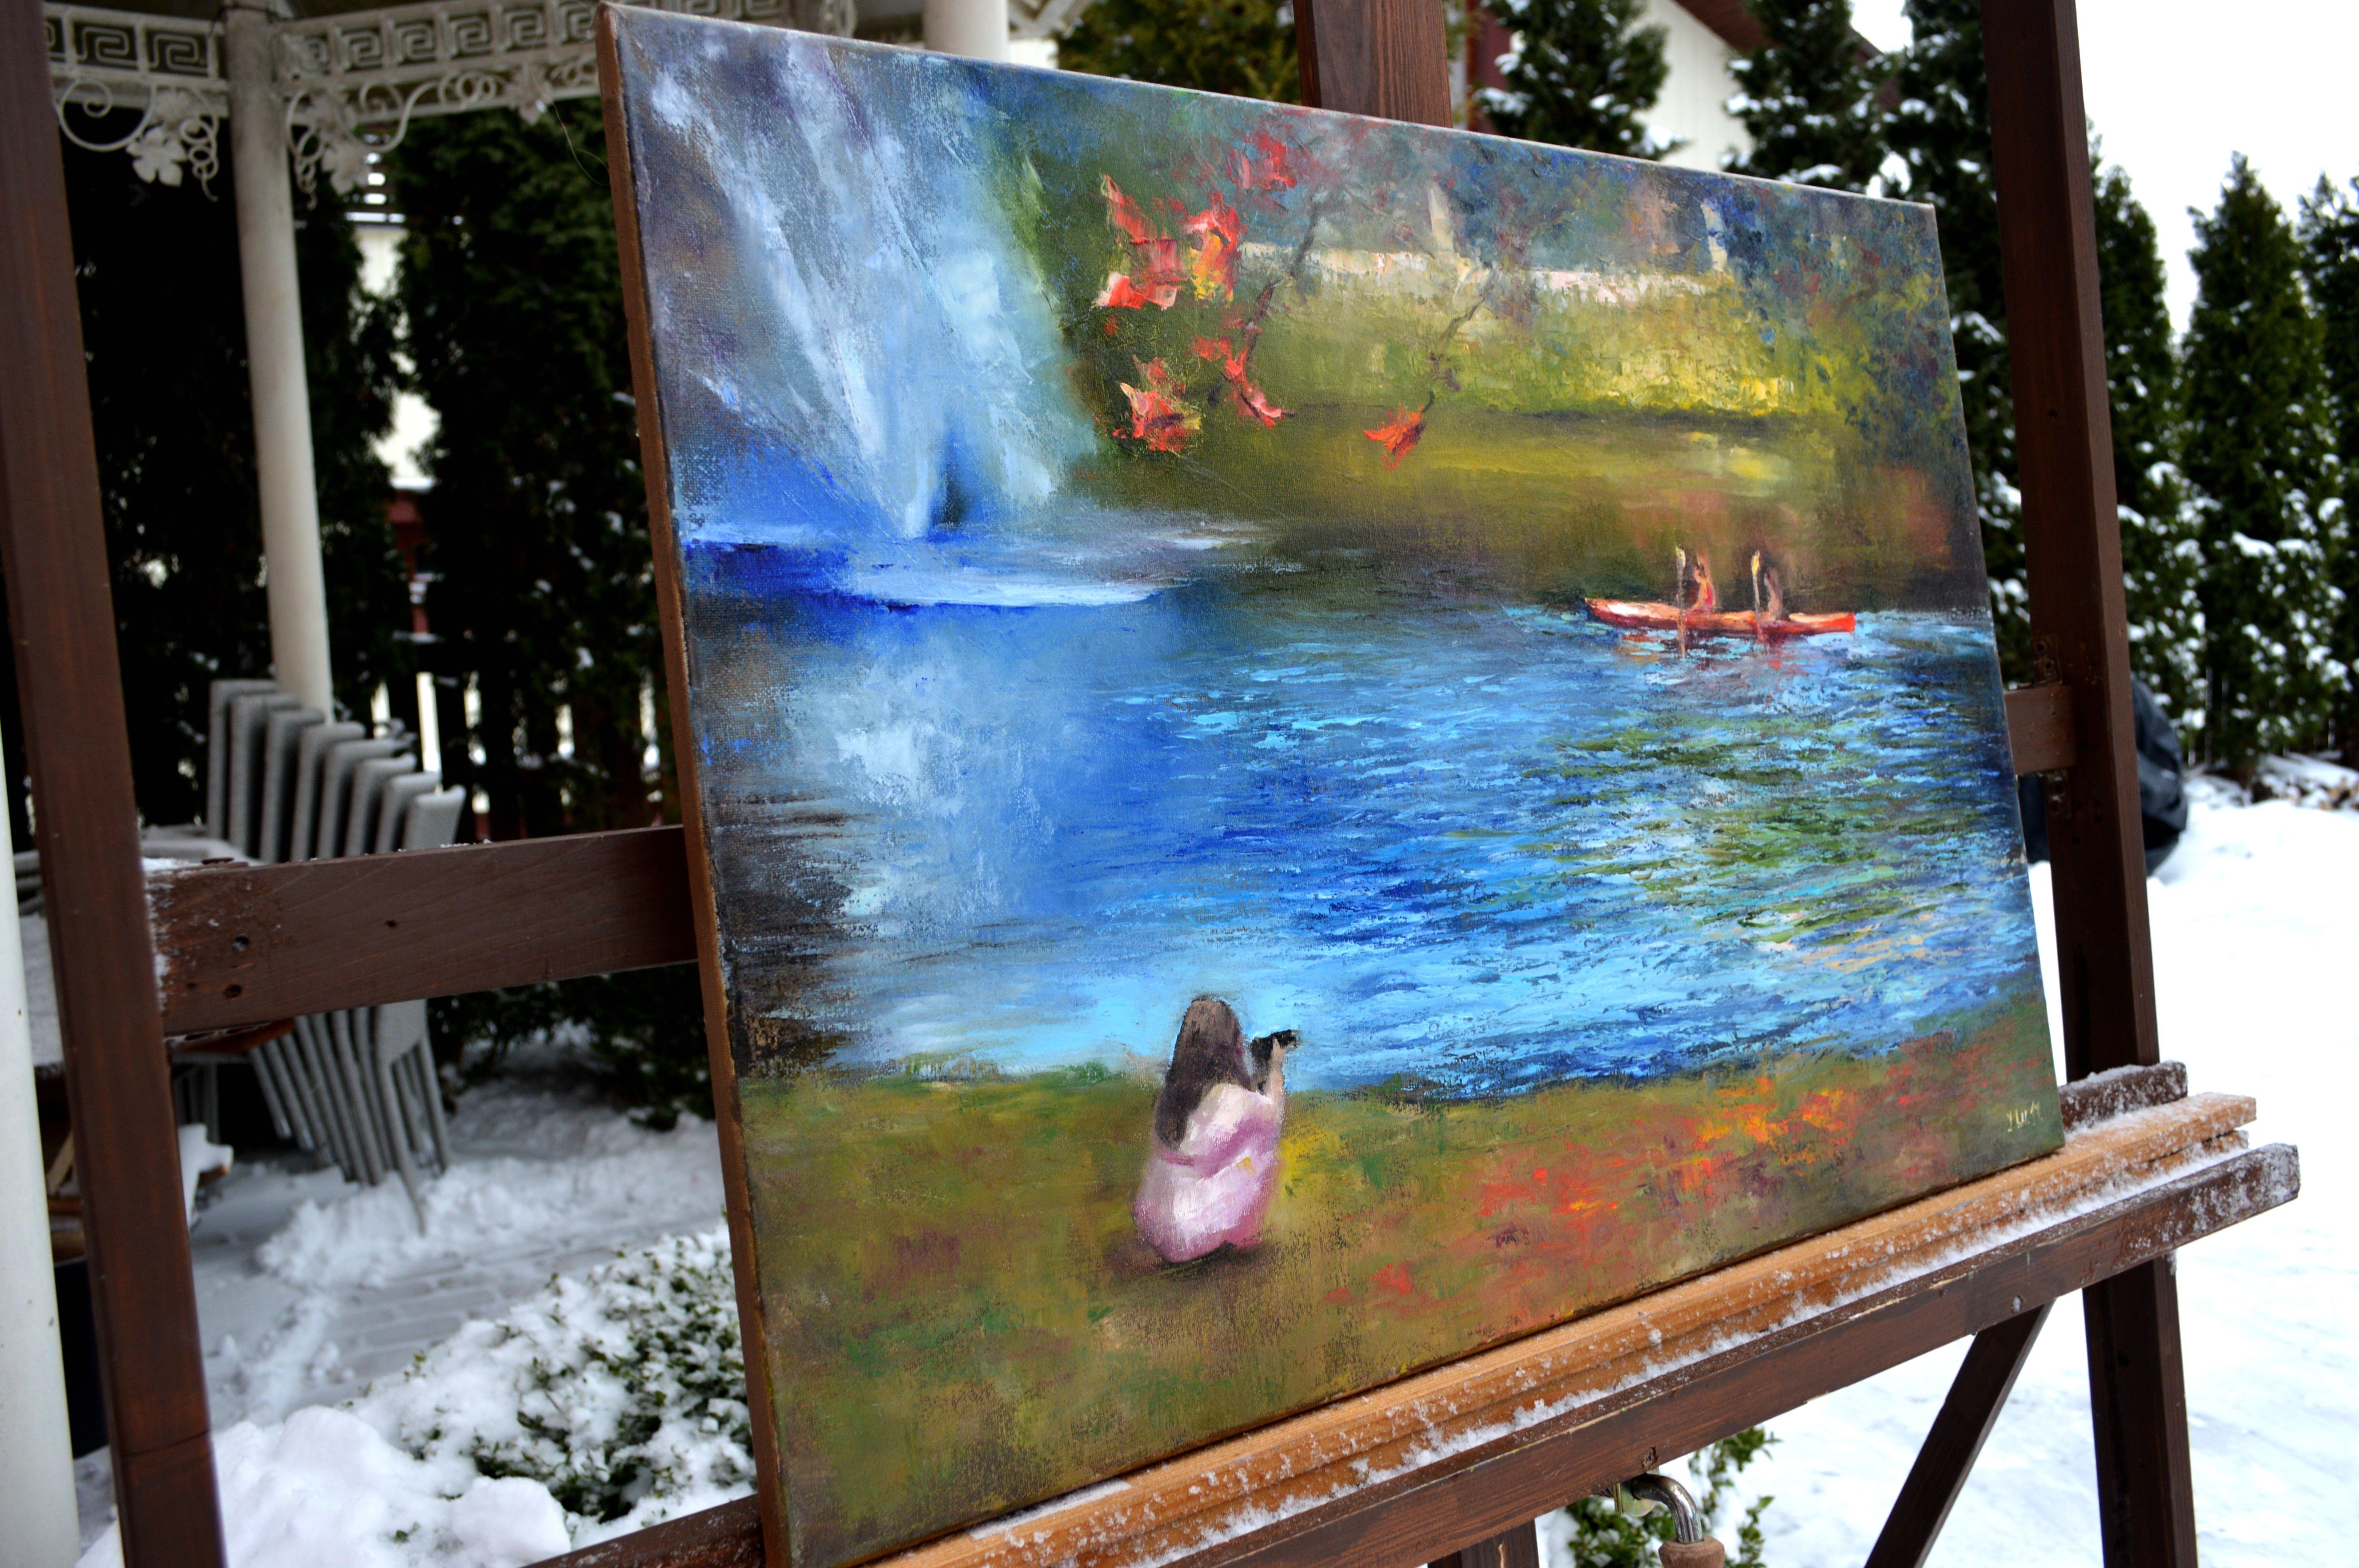 River fountain in a city park - Painting by Elena Lukina